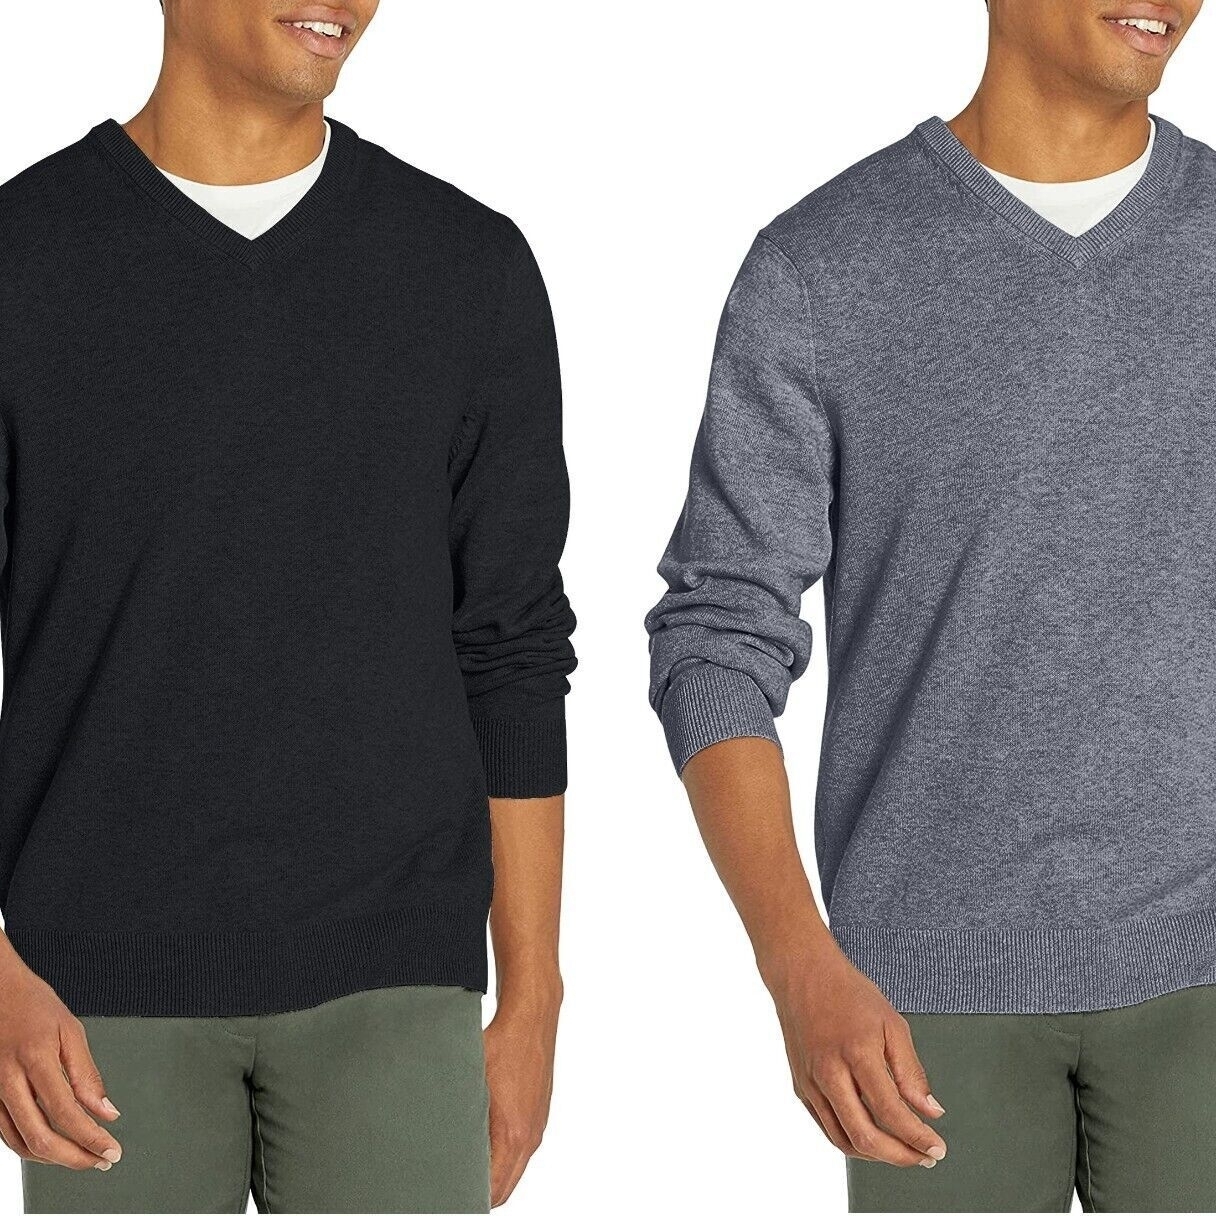 2-Pack Men's Casual Cozy Ultra Soft Slim Fit Warm Knit Pullover V-Neck Sweater - Black&Grey, Large